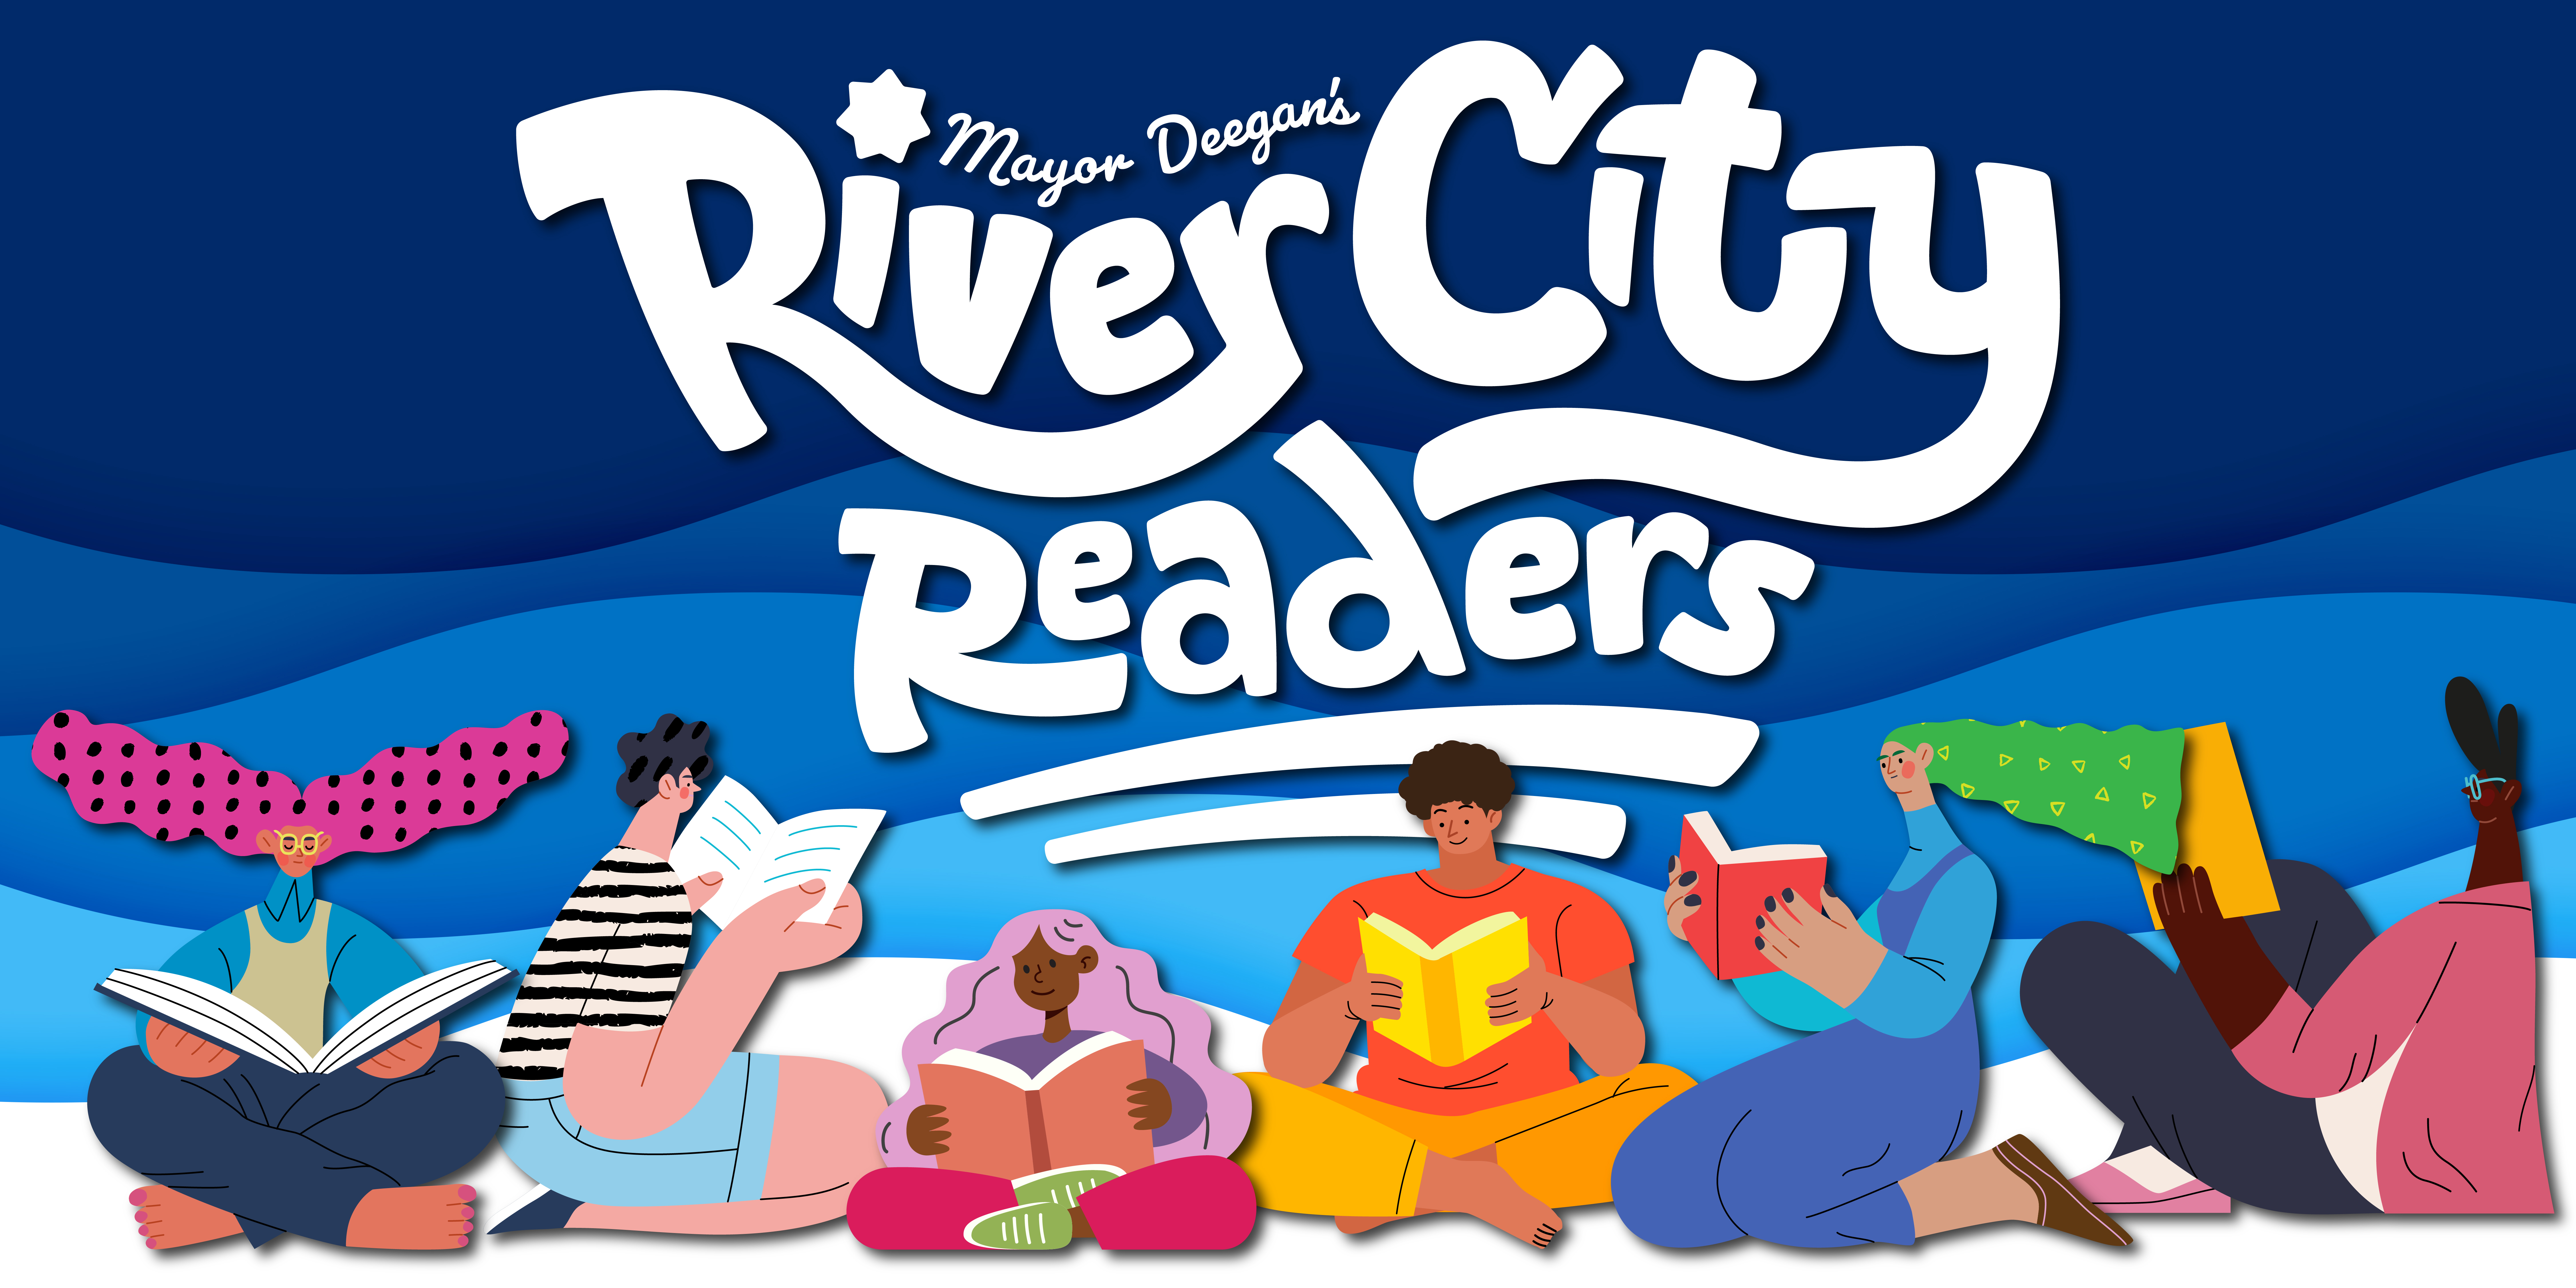 Mayor Deegan's River City Readers. Image includes people of all ages reading books.